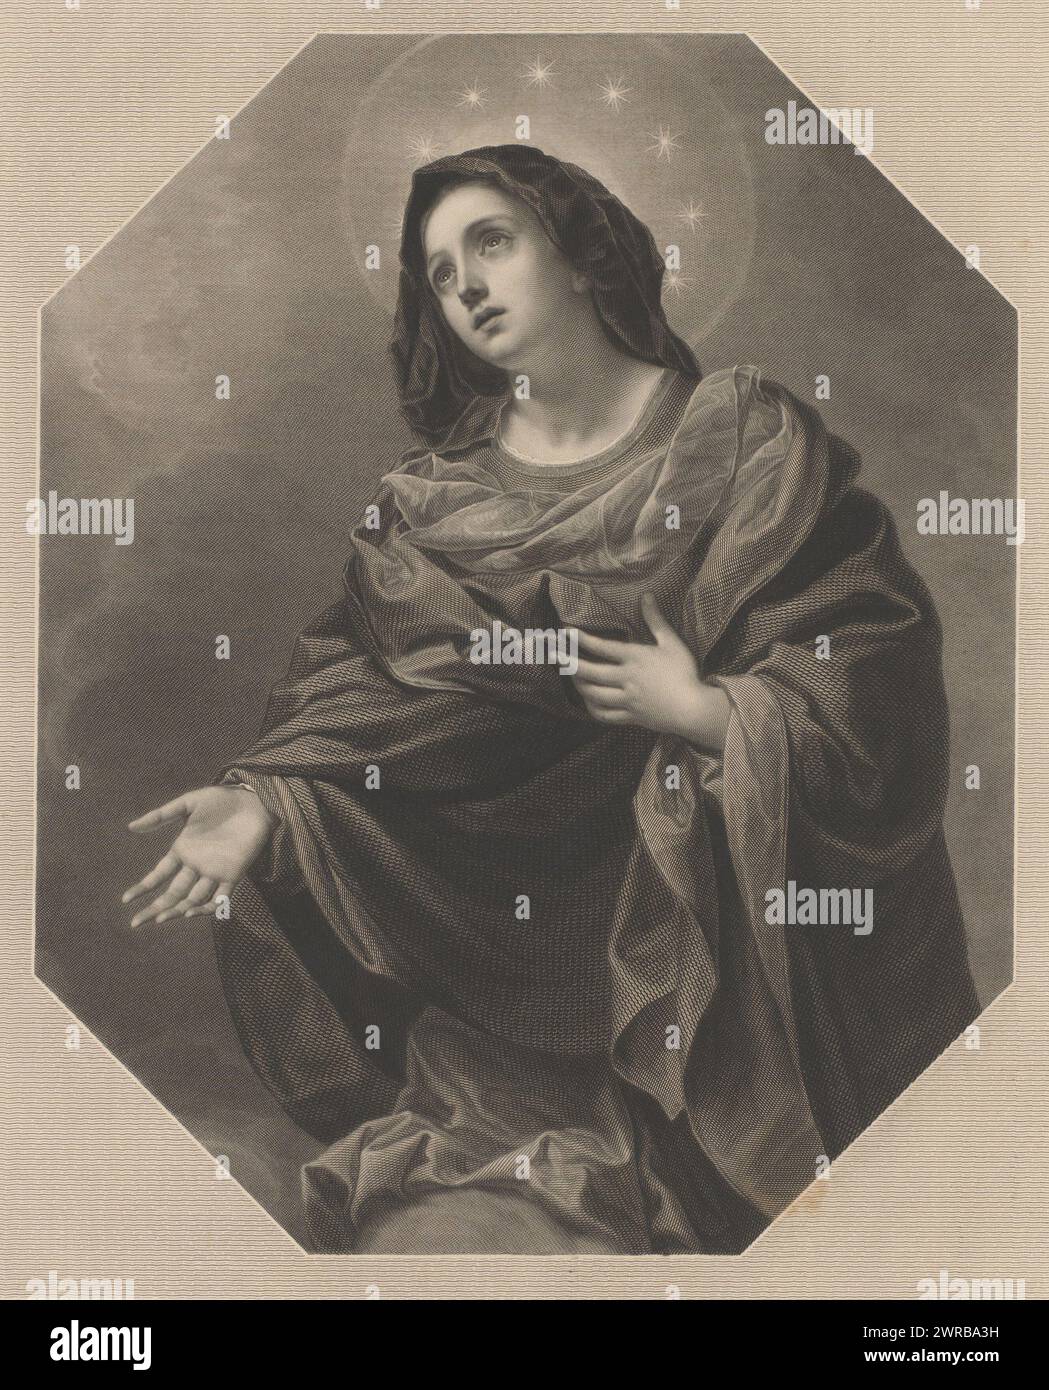 Maria as Mater Dolorosa, Text in Italian in the bottom margin., print maker: Eduard Mandel, after painting by: Carlo Dolci, printer: Thomas Ross & Sons, print maker: Berlin, printer: London, publisher: London, 1848, paper, etching, engraving, height 438 mm × width 348 mm, print Stock Photo